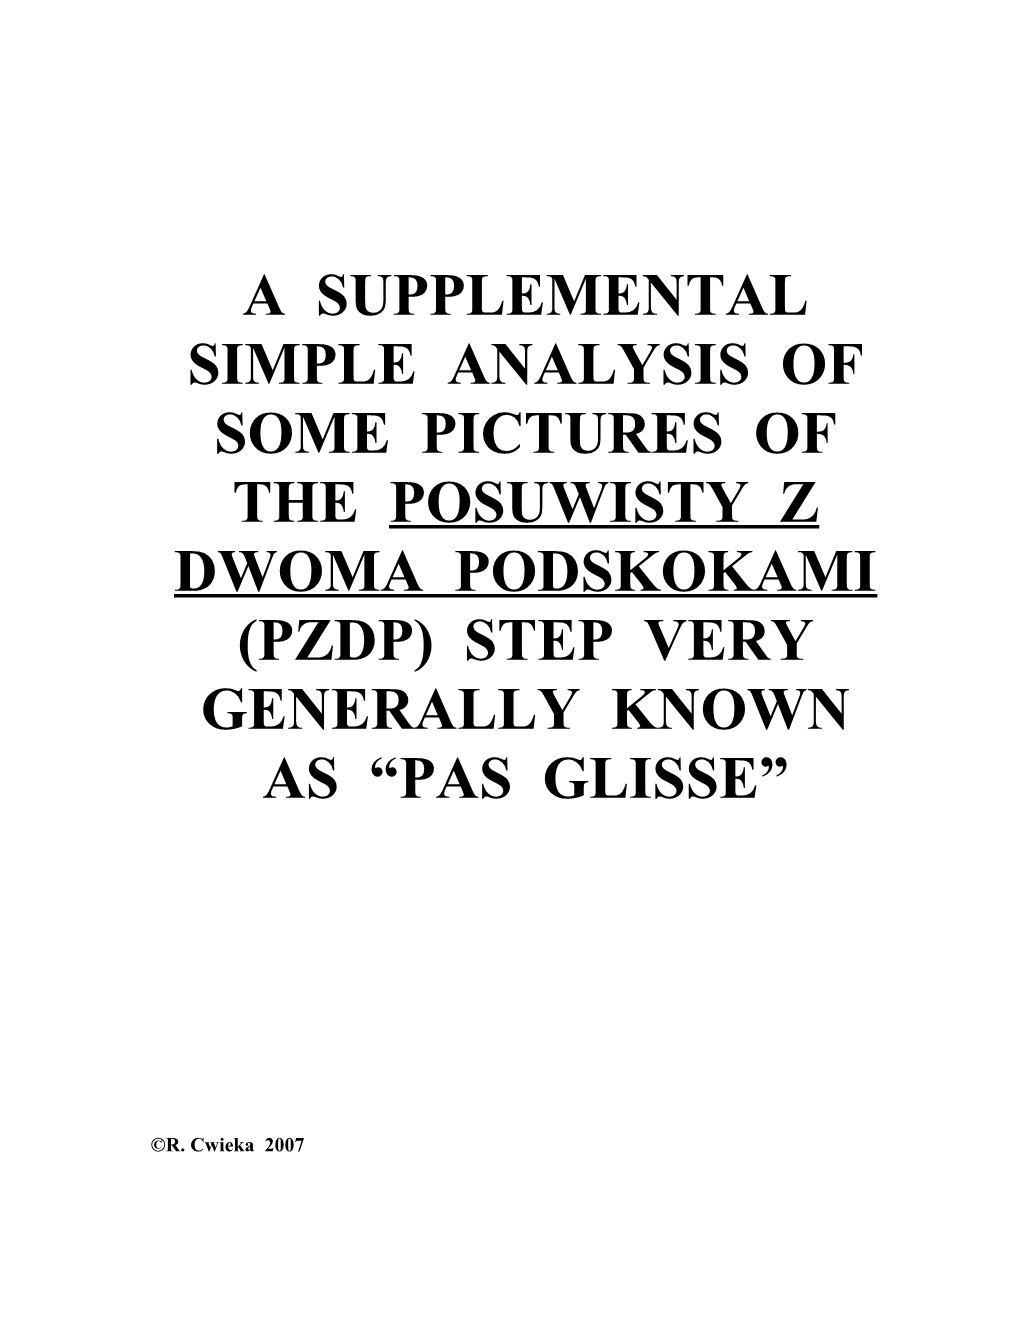 A Simple Analysis of Illustrations of the Posuwityzdp Step